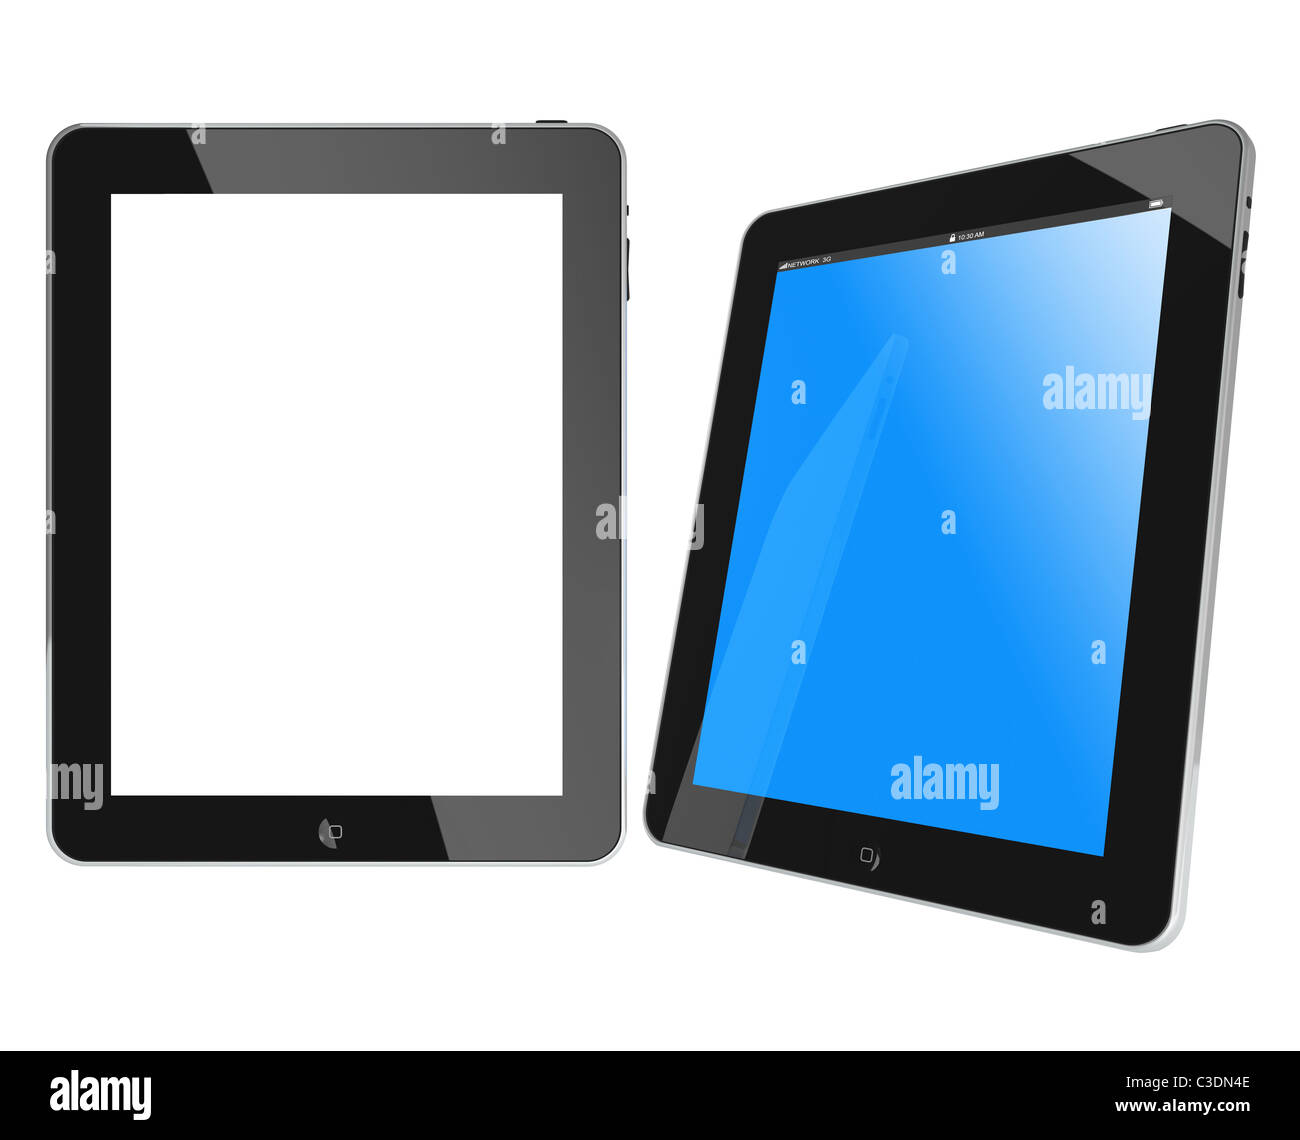 New Apple iPad portable computer tablet glossy black and chromed, blue screen, isolated on white with reflection. Stock Photo